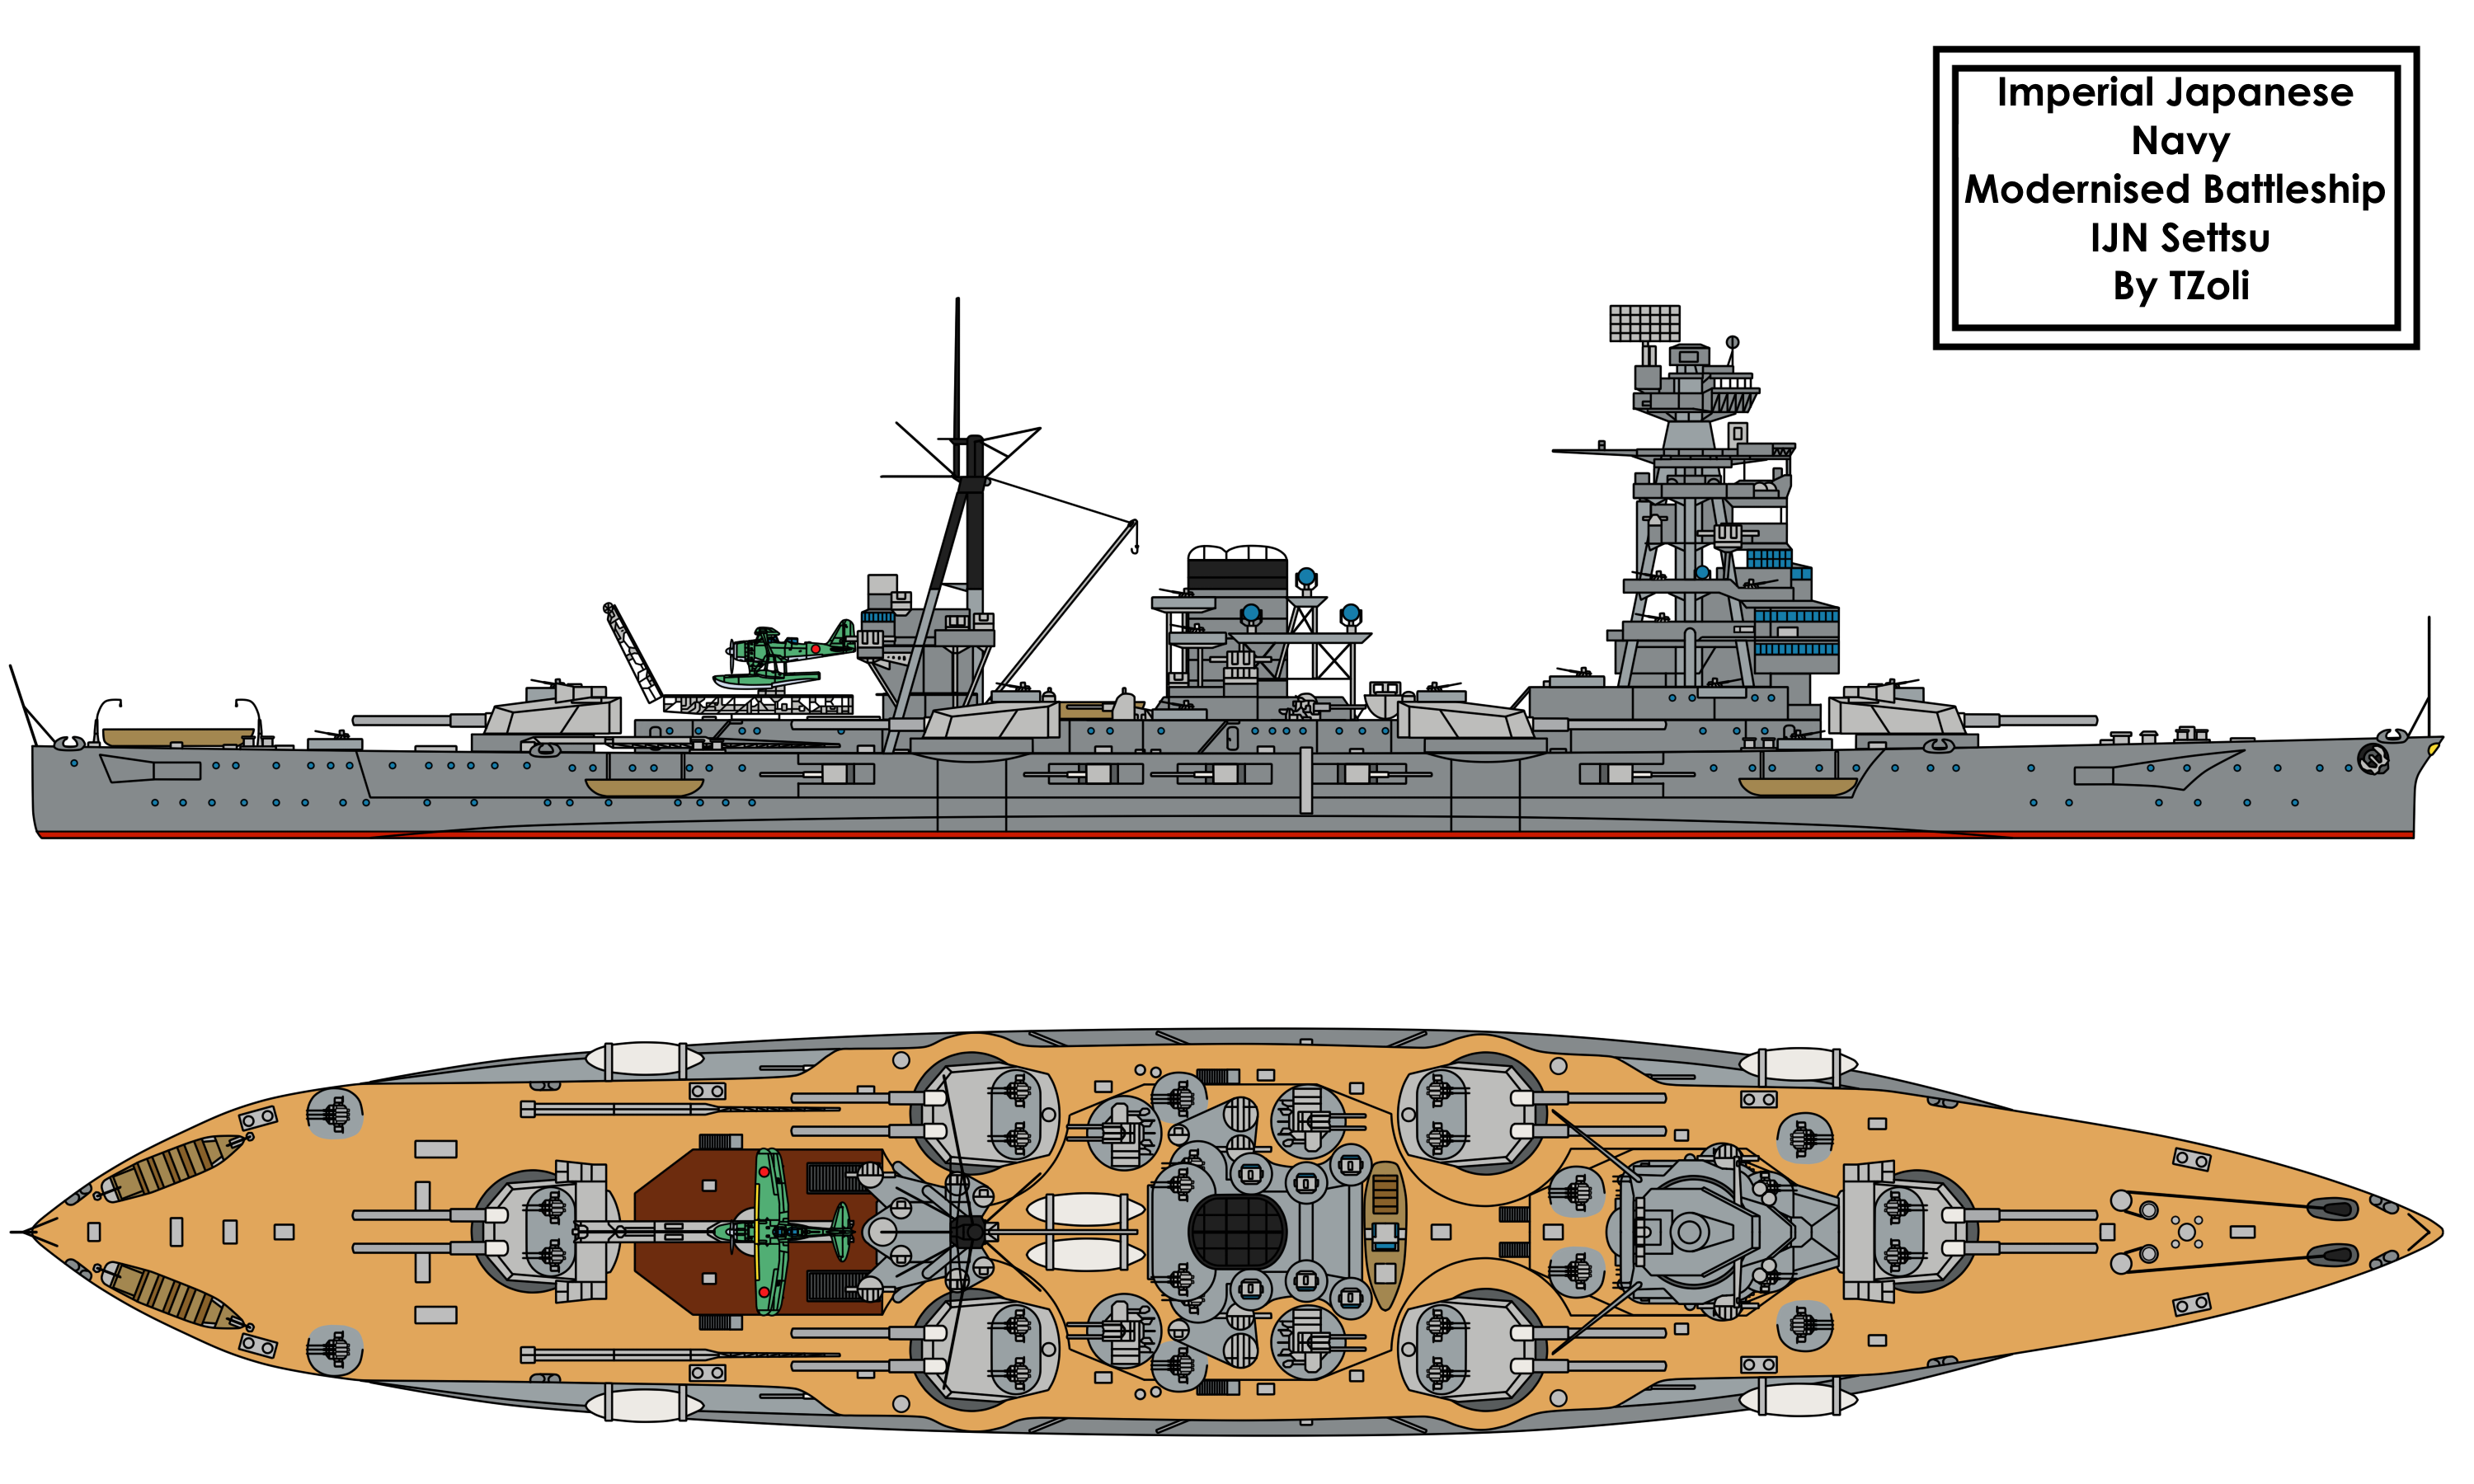 coloured_modernised_ijn_settsu_by_tzoli-d9144a7.png